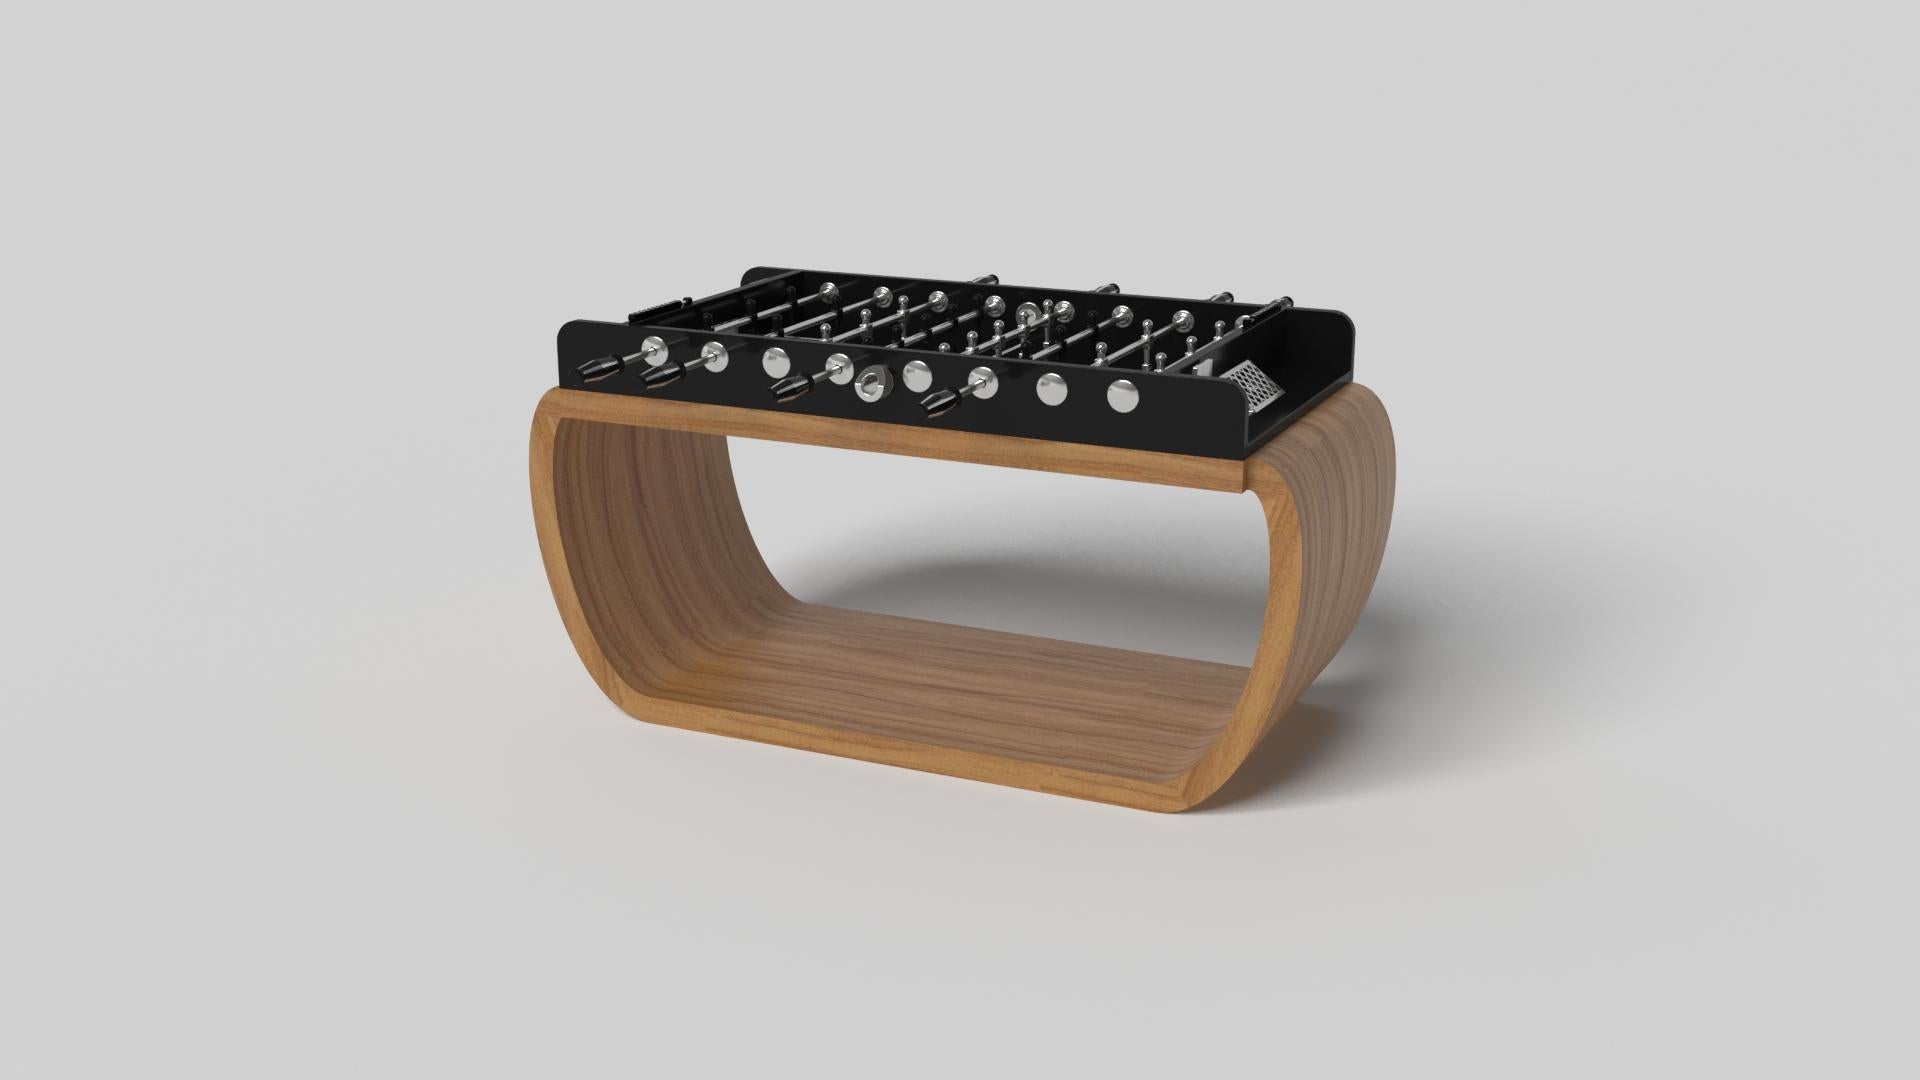 Handcrafted with intricate accents and a precision-carved curved base, the Sid foosball table in black encompasses a series of smooth edges, distinctive details, and unconventional elements in one unique expression of luxury design. Built by hand